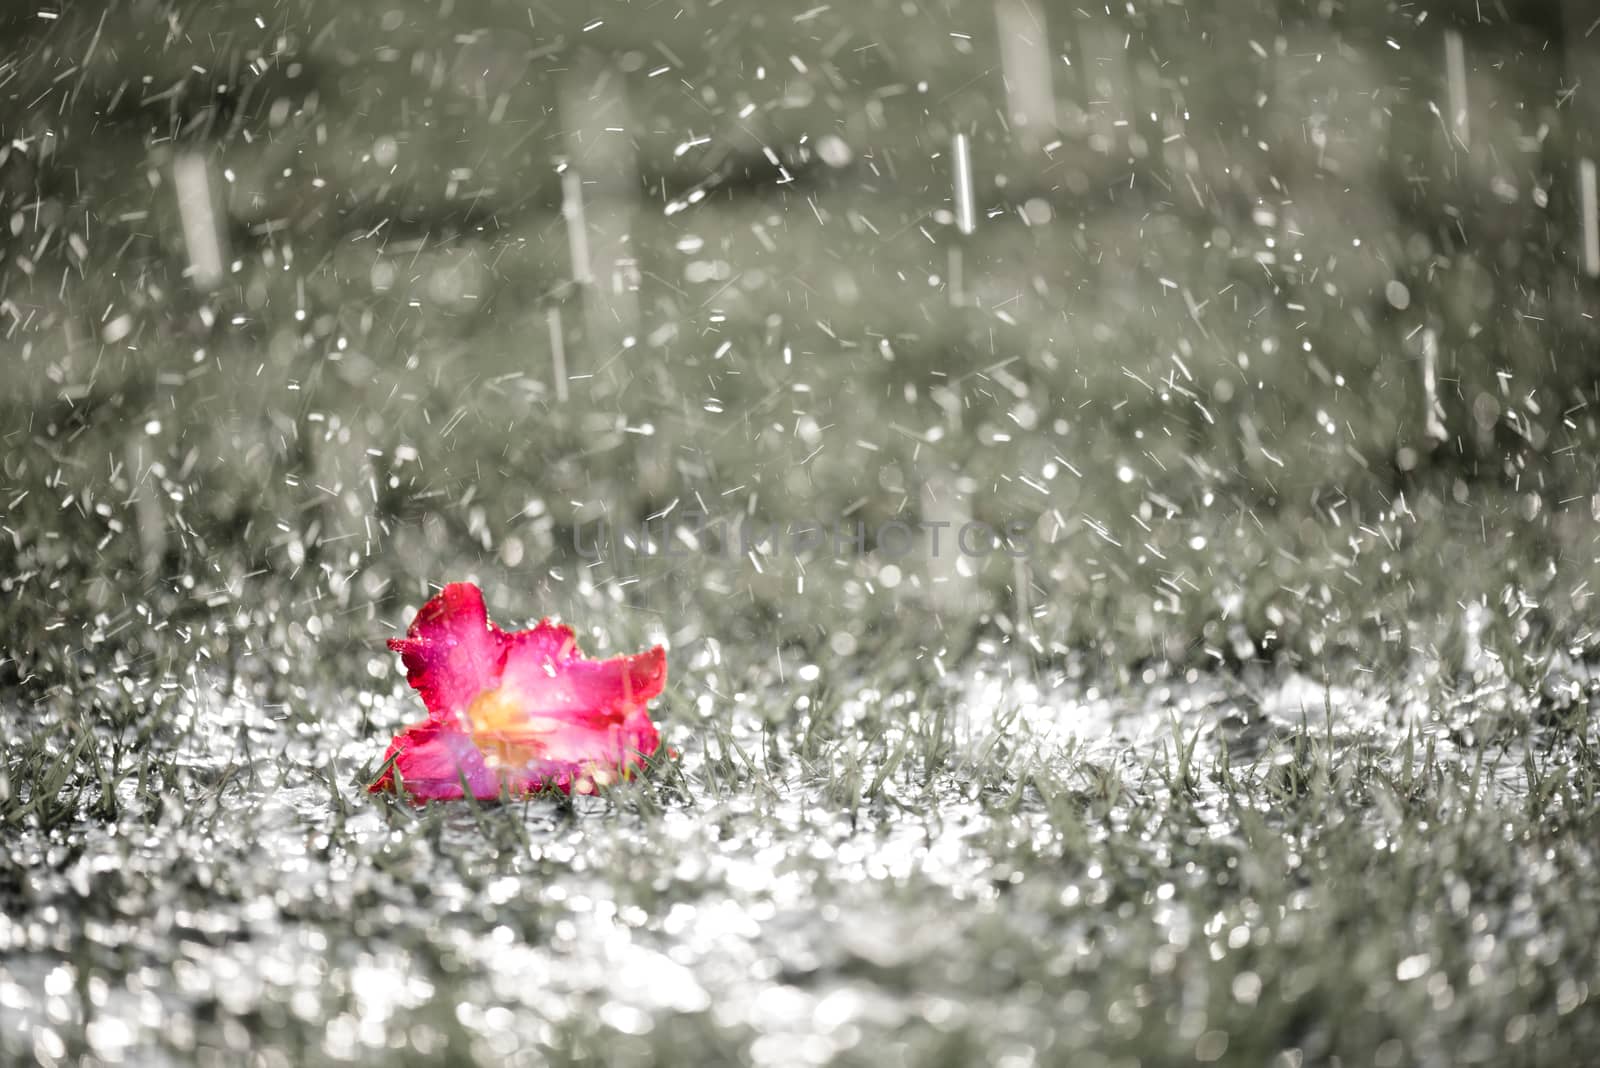 Soft focus of Close up on alone Pink flower with heavy raining o by spukkato